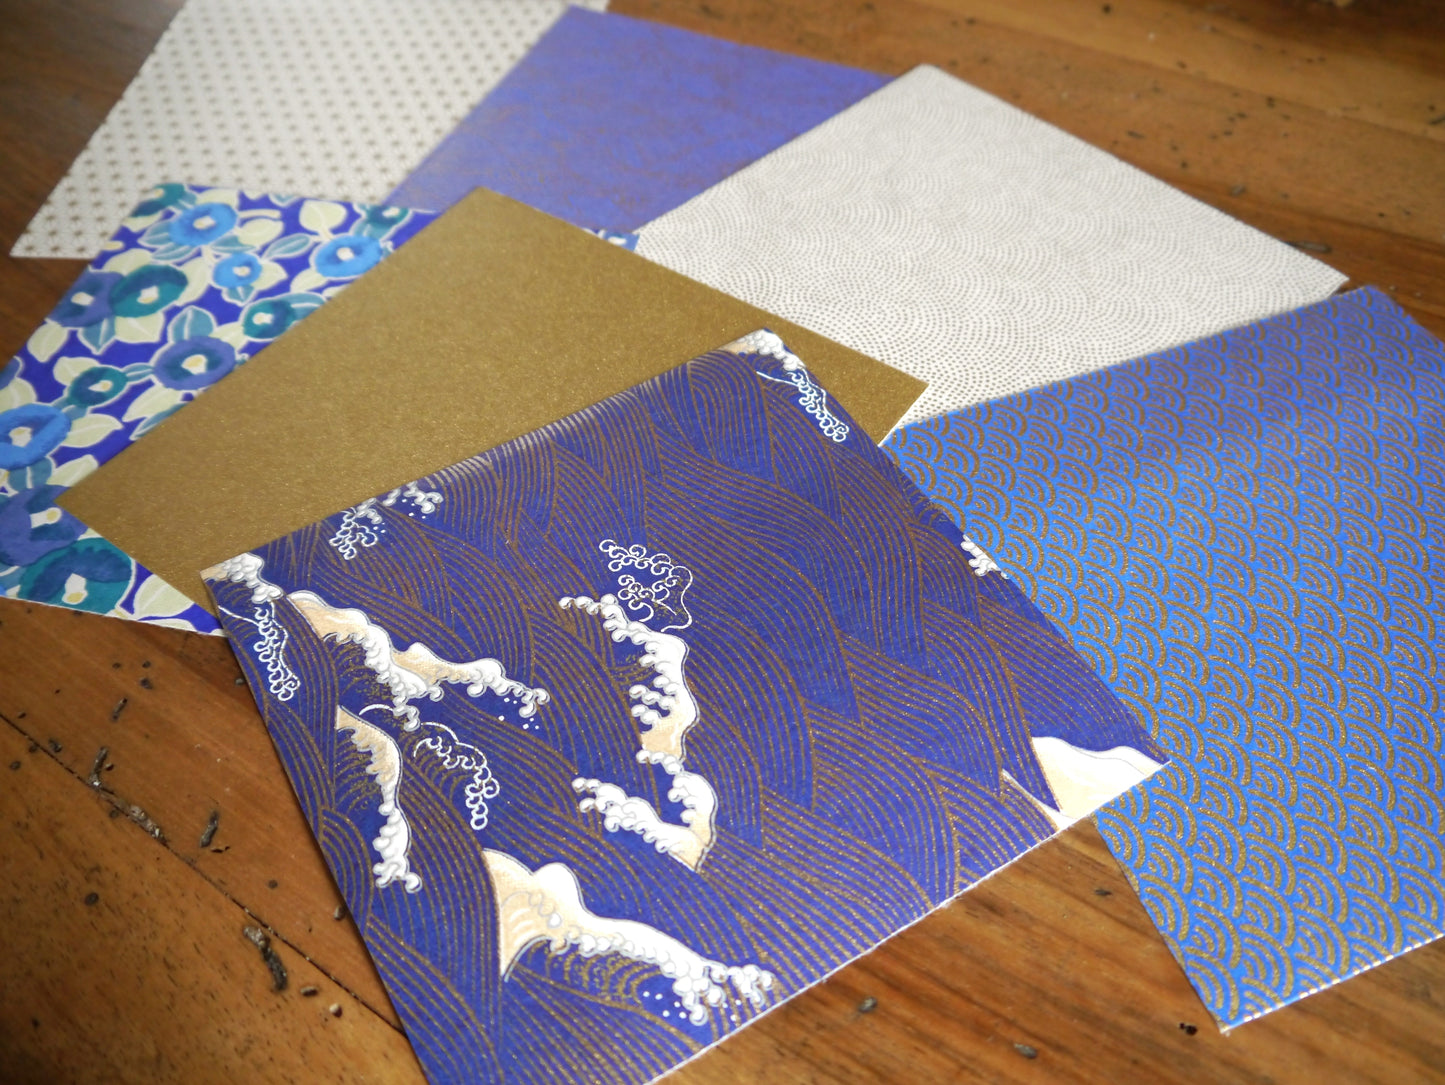 Kit of 7 Japanese origami papers - "Cobalt" - Midnight blue, purple, white, gold